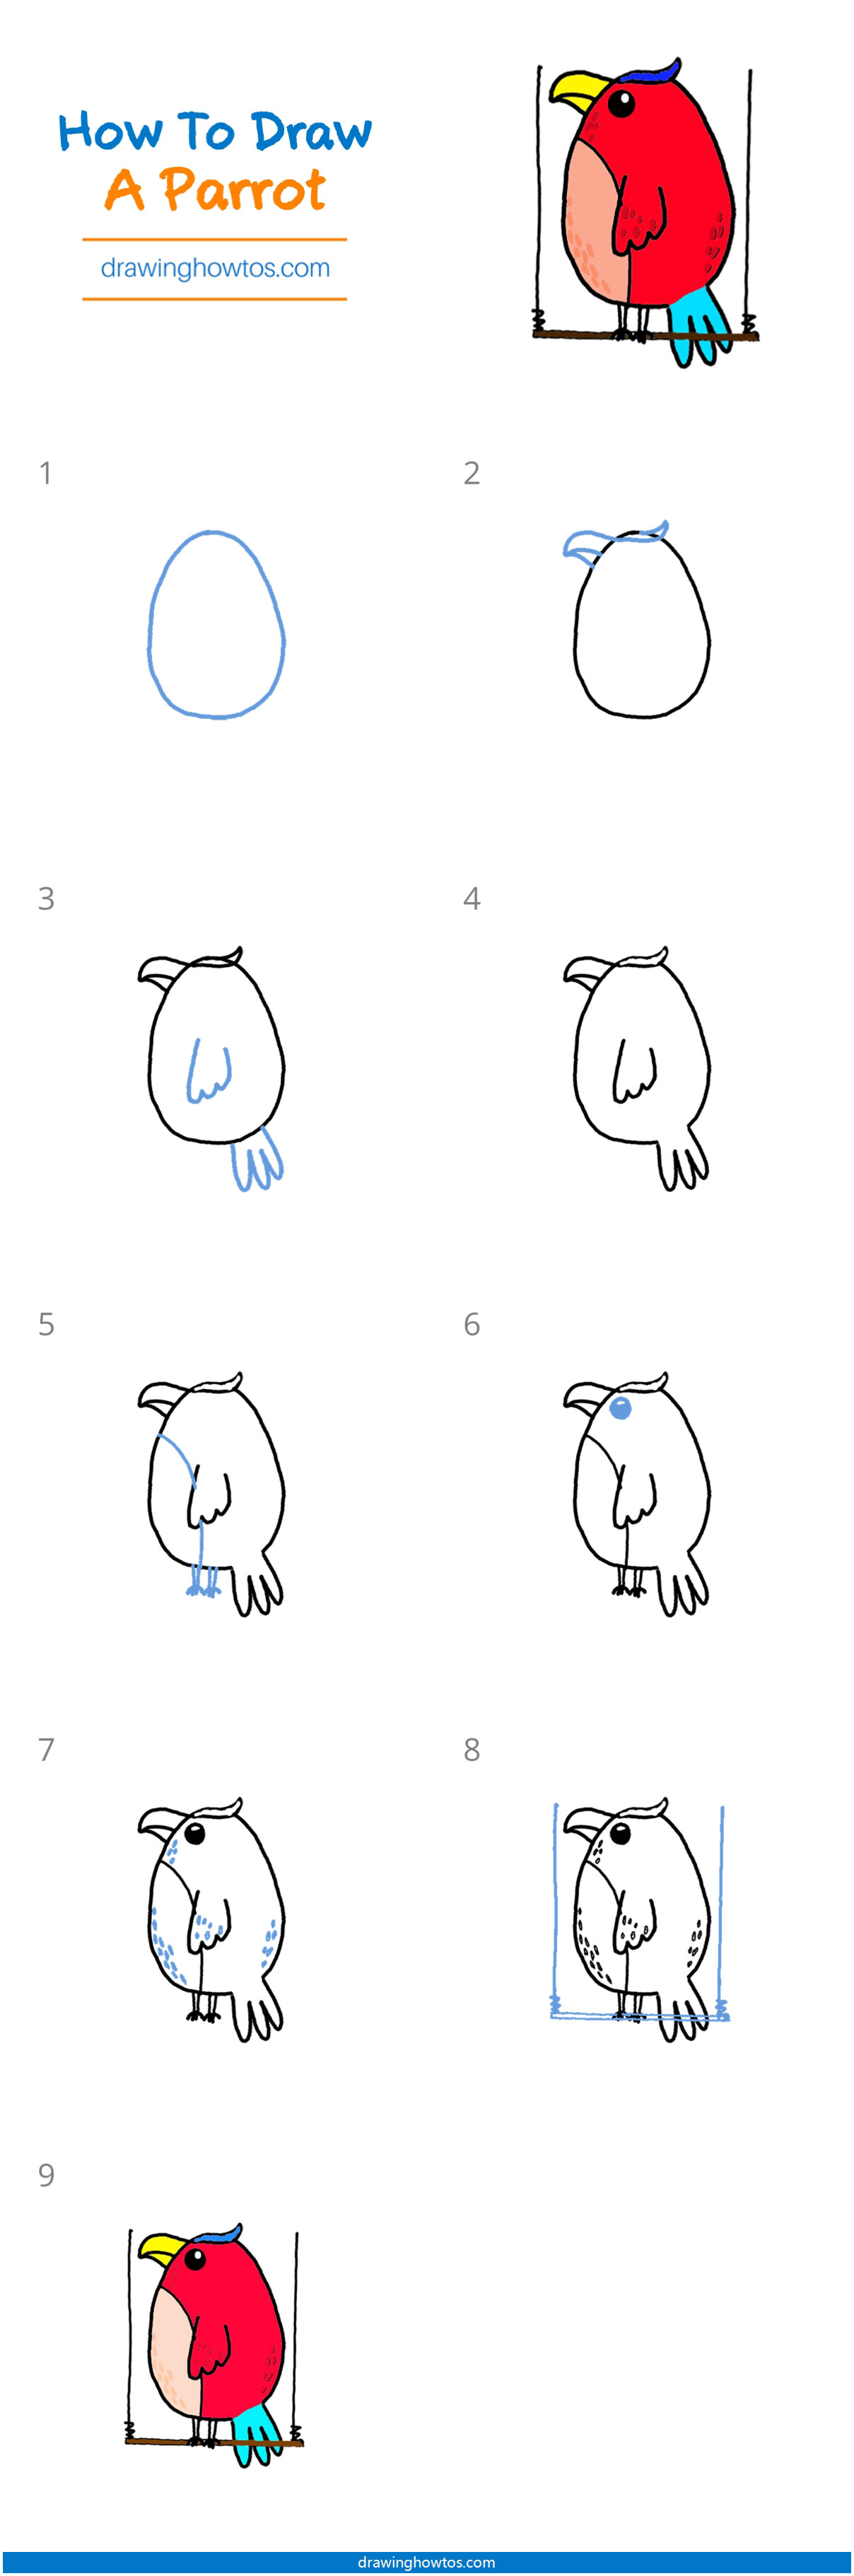 How to Draw a Parrot Step by Step